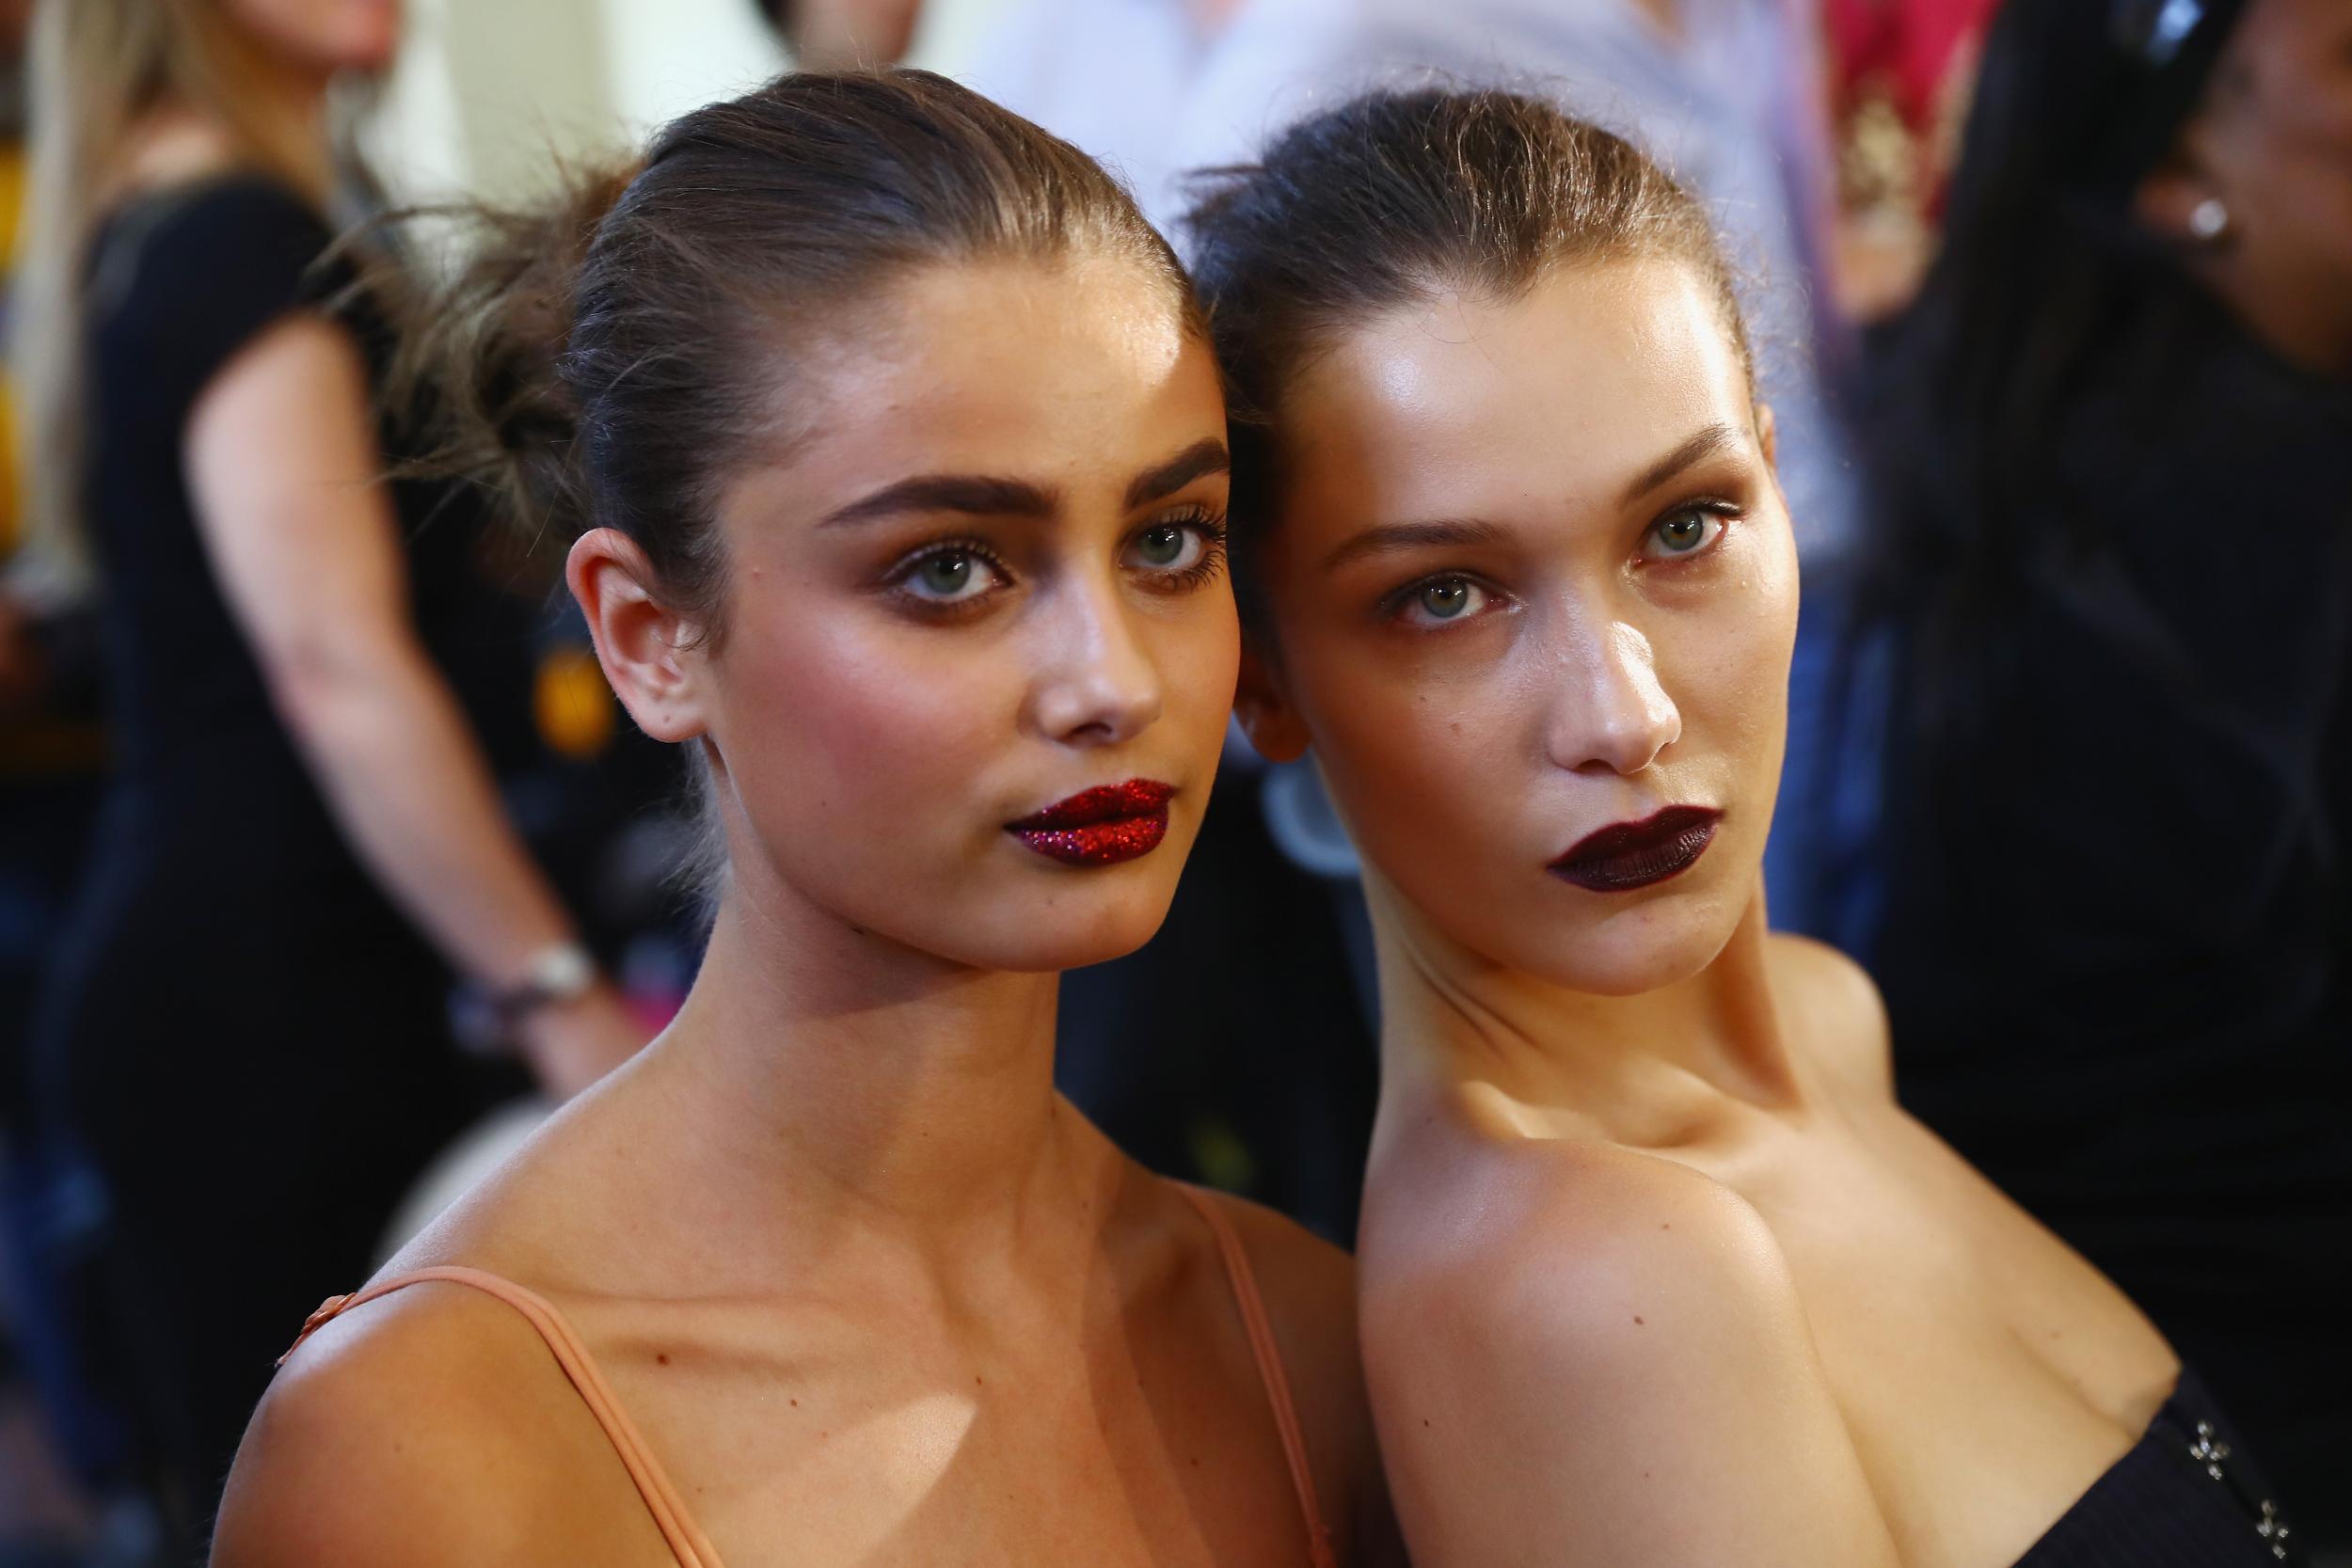 Taylor Hill and Bella Hadid prepare backstage prior to the Atelier Versace Haute Couture AW17